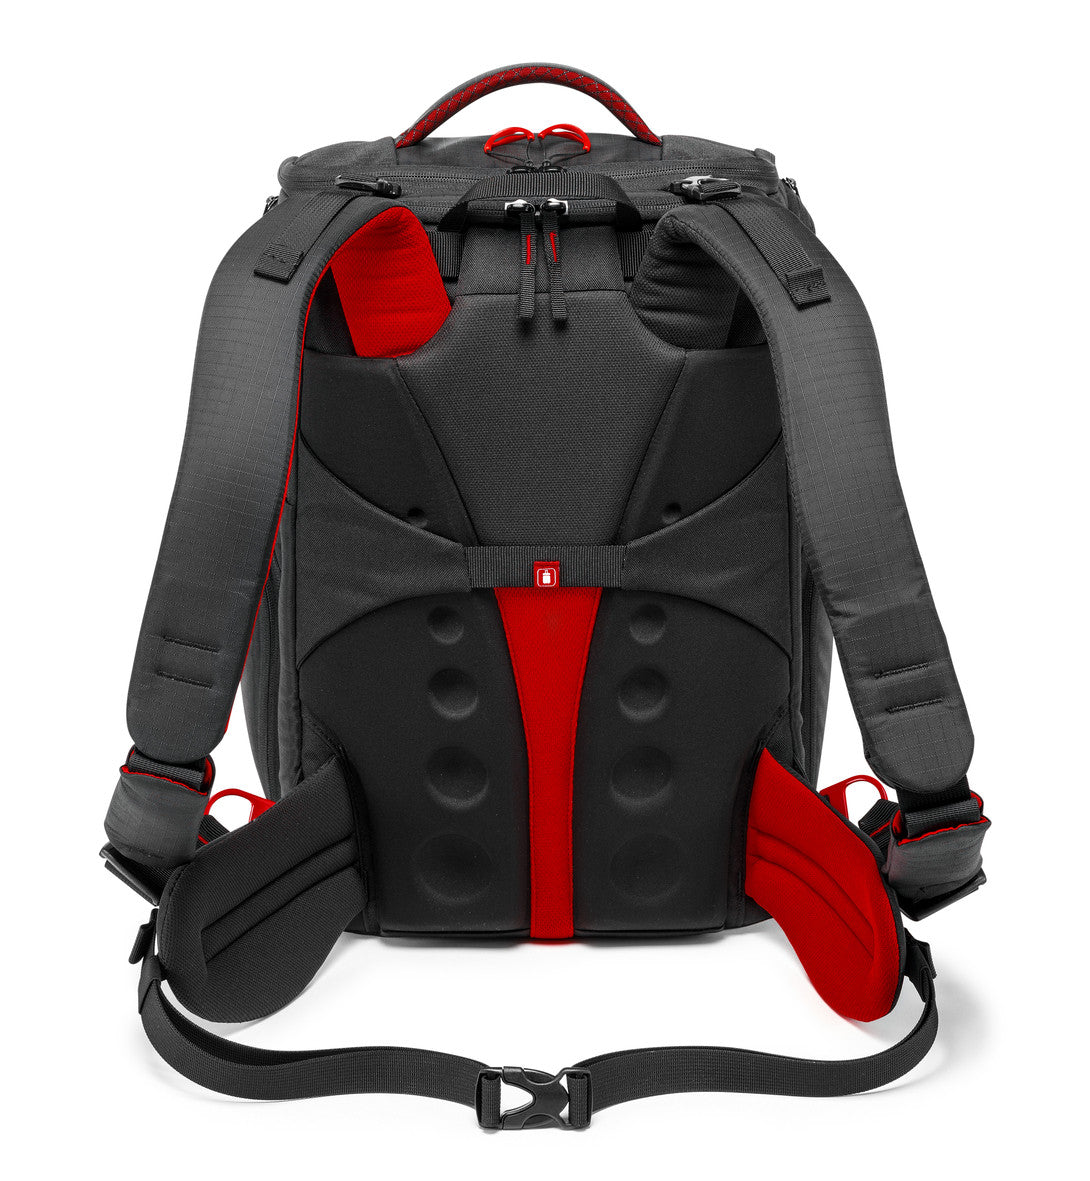 Manfrotto Pro-Light 3N1-35 Camera Backpack, discontinued, Manfrotto - Pictureline  - 4